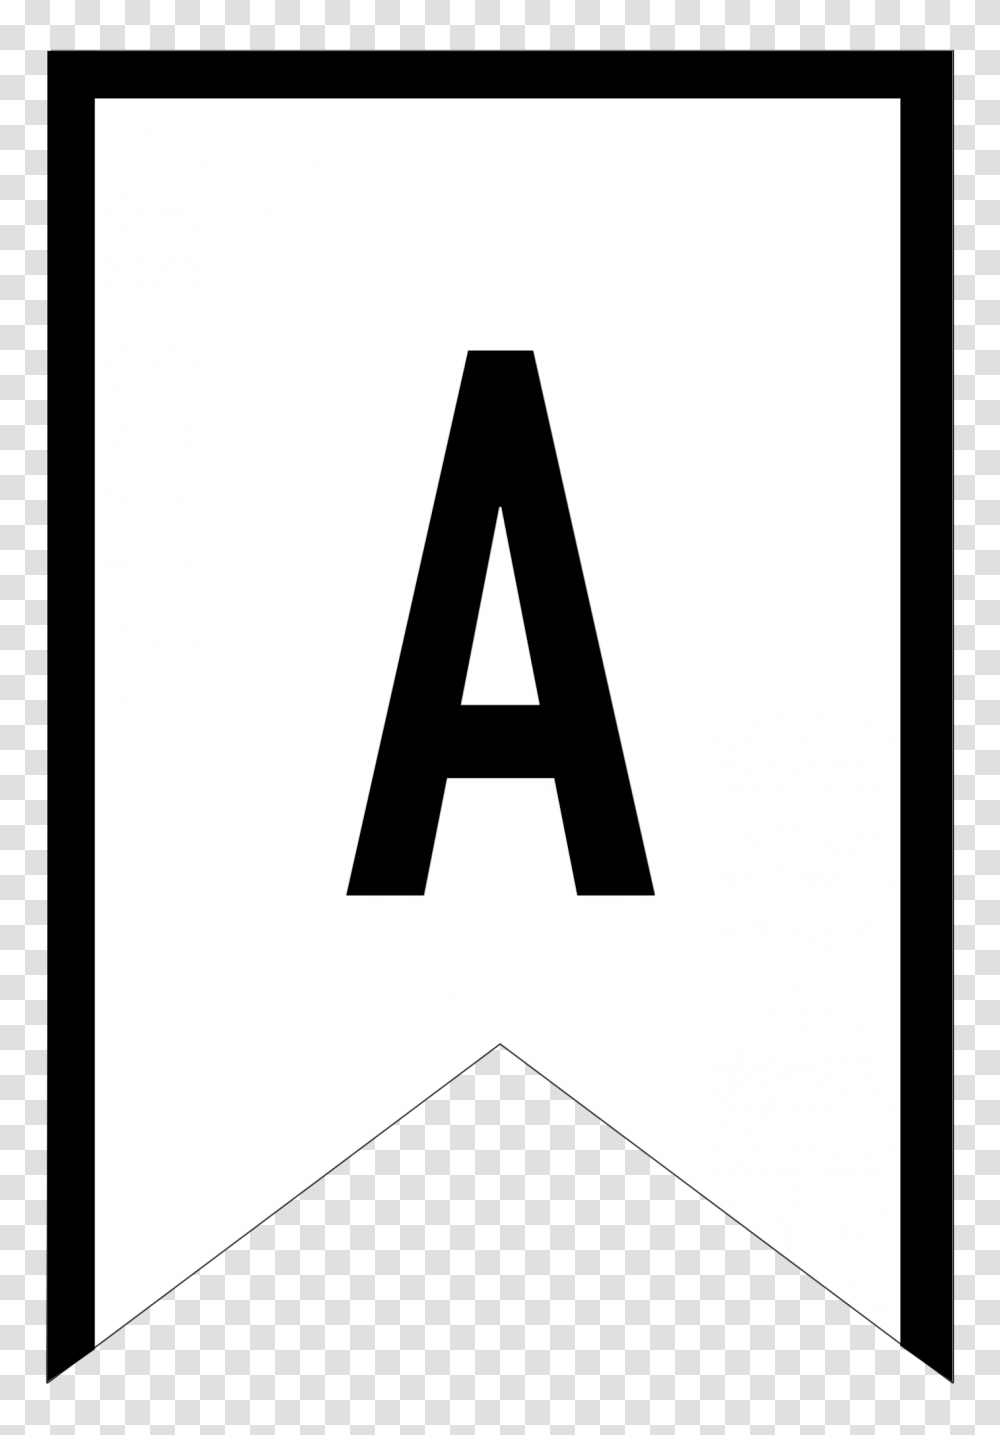 Banner Templates Free Printable Abc Letters, Label, Logo Throughout Letter Templates For Banners